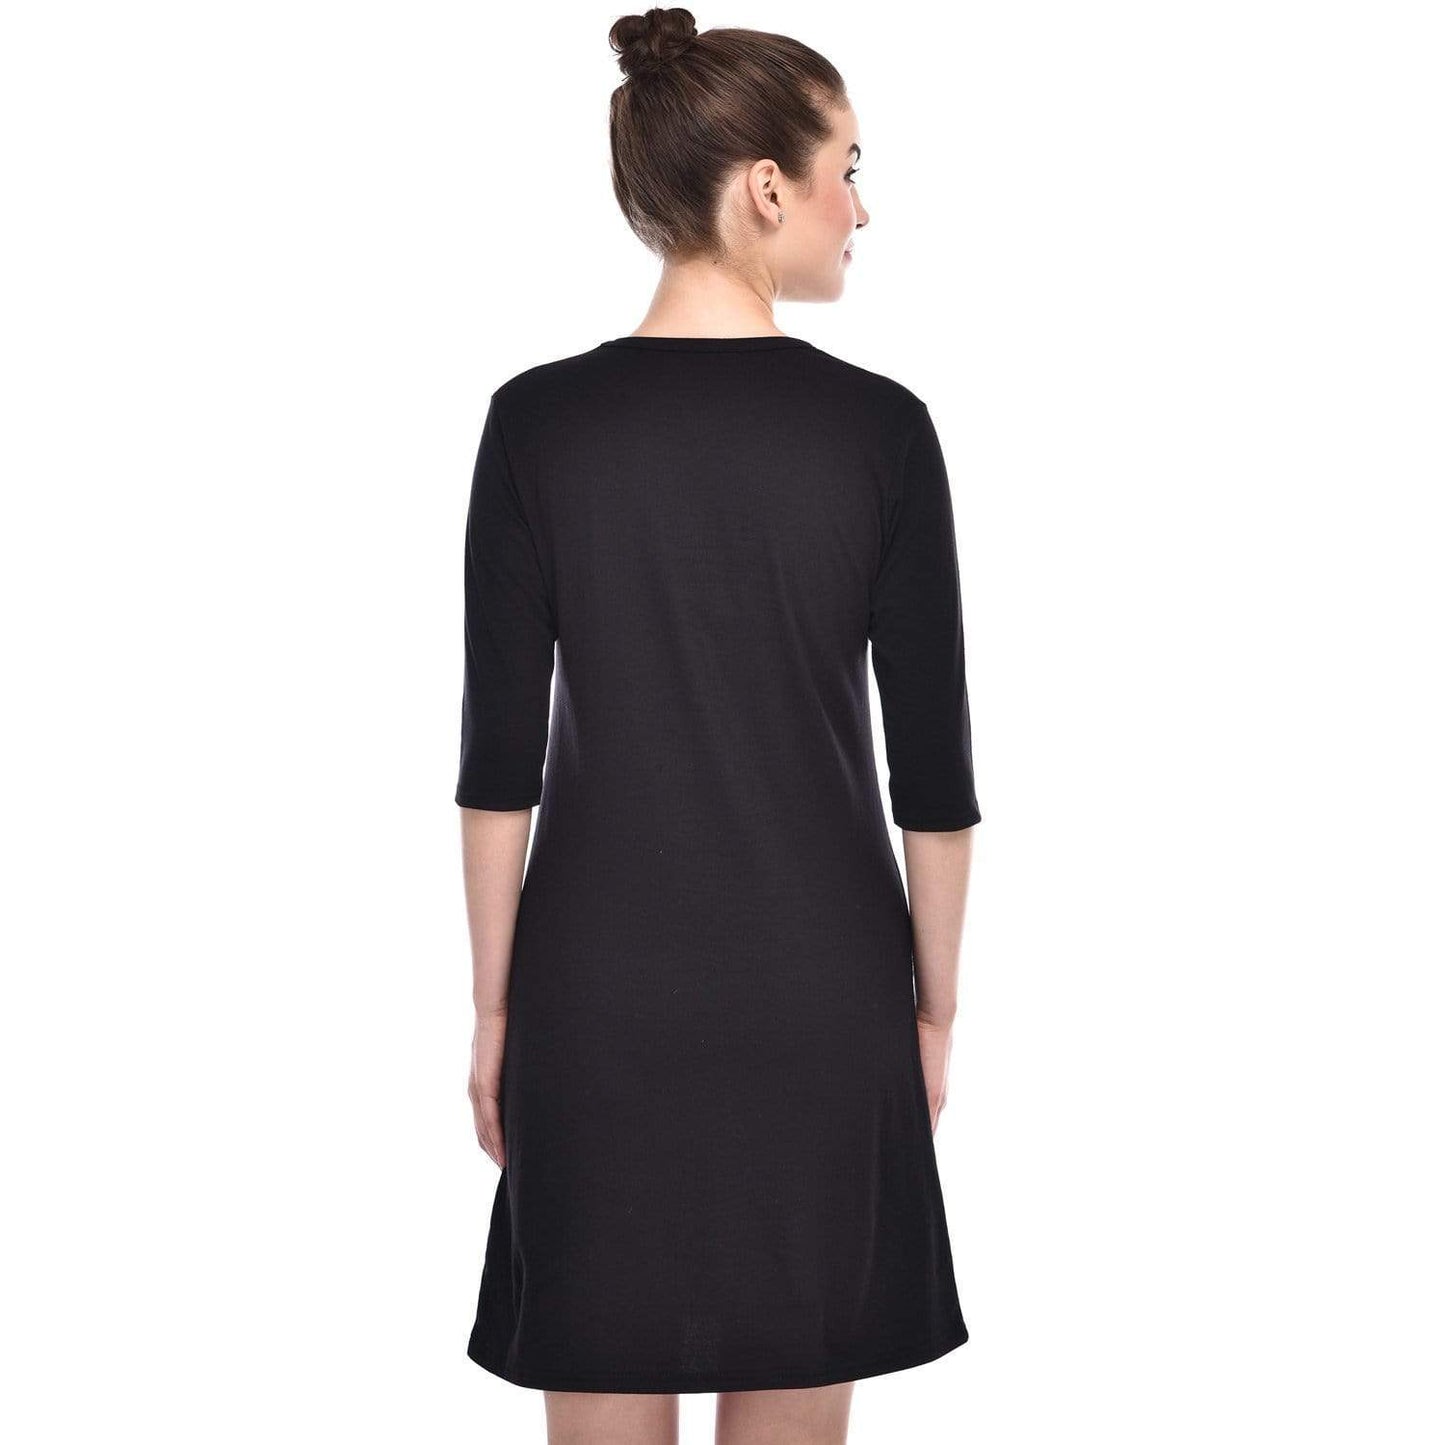 Bazarville Customer XS / 100% Cotton / Charcoal Black Bazarville Charcoal Black T-shirt Dress